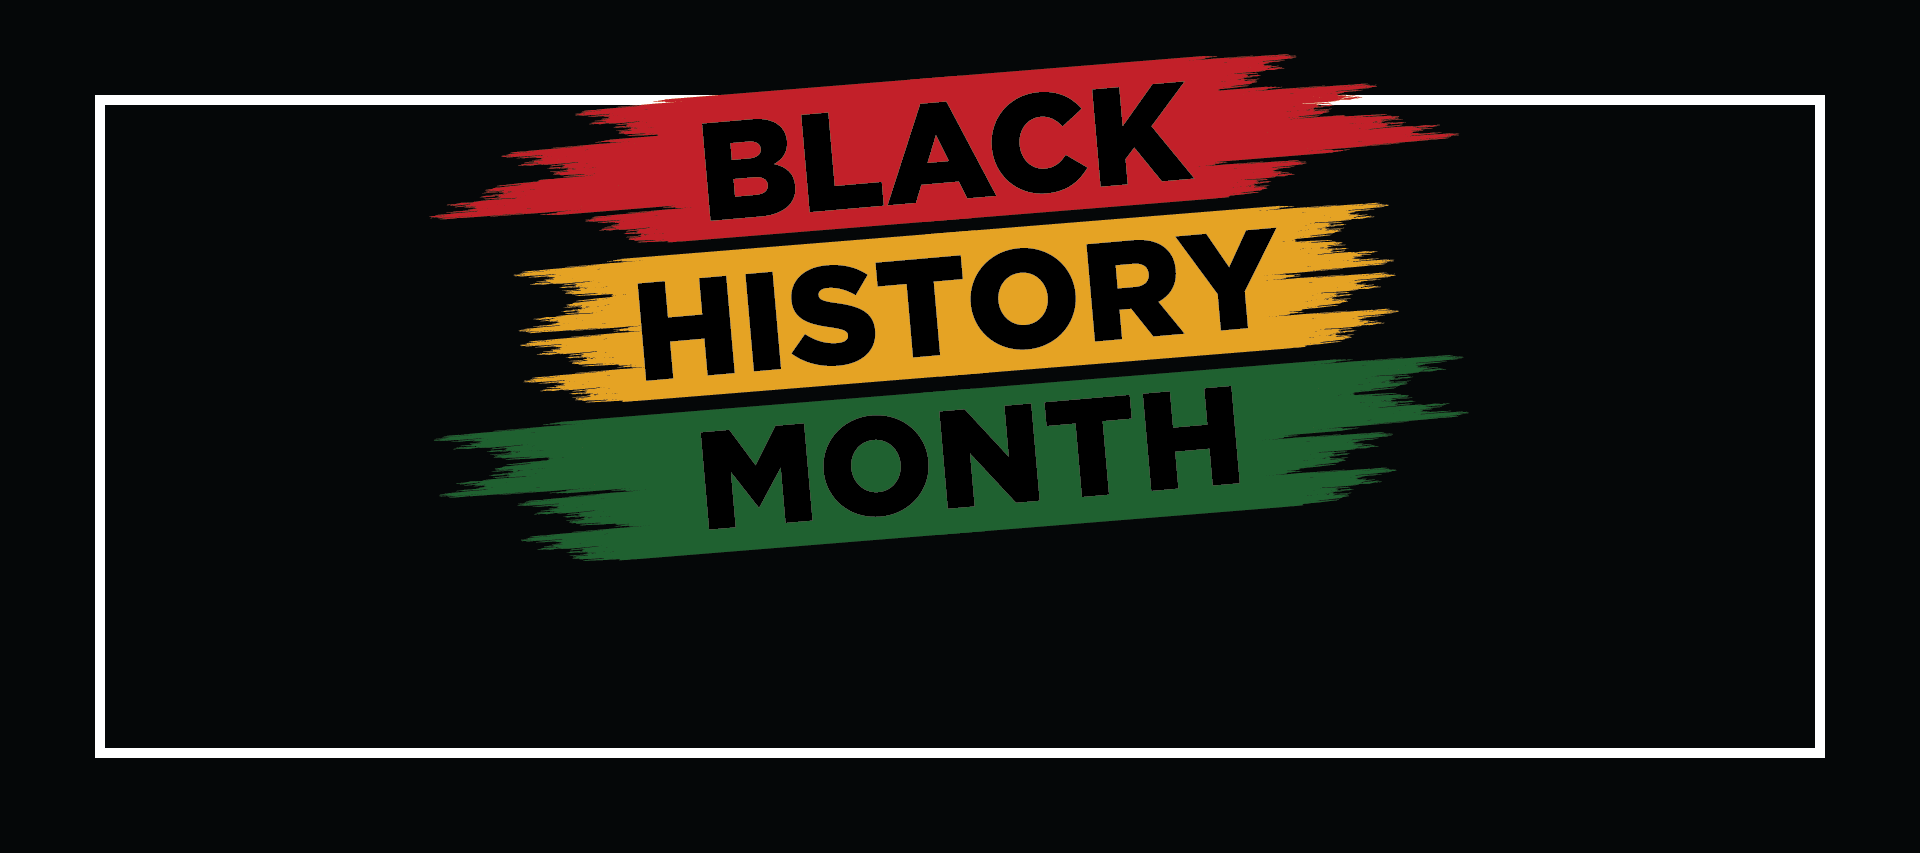 Text: Black History Month